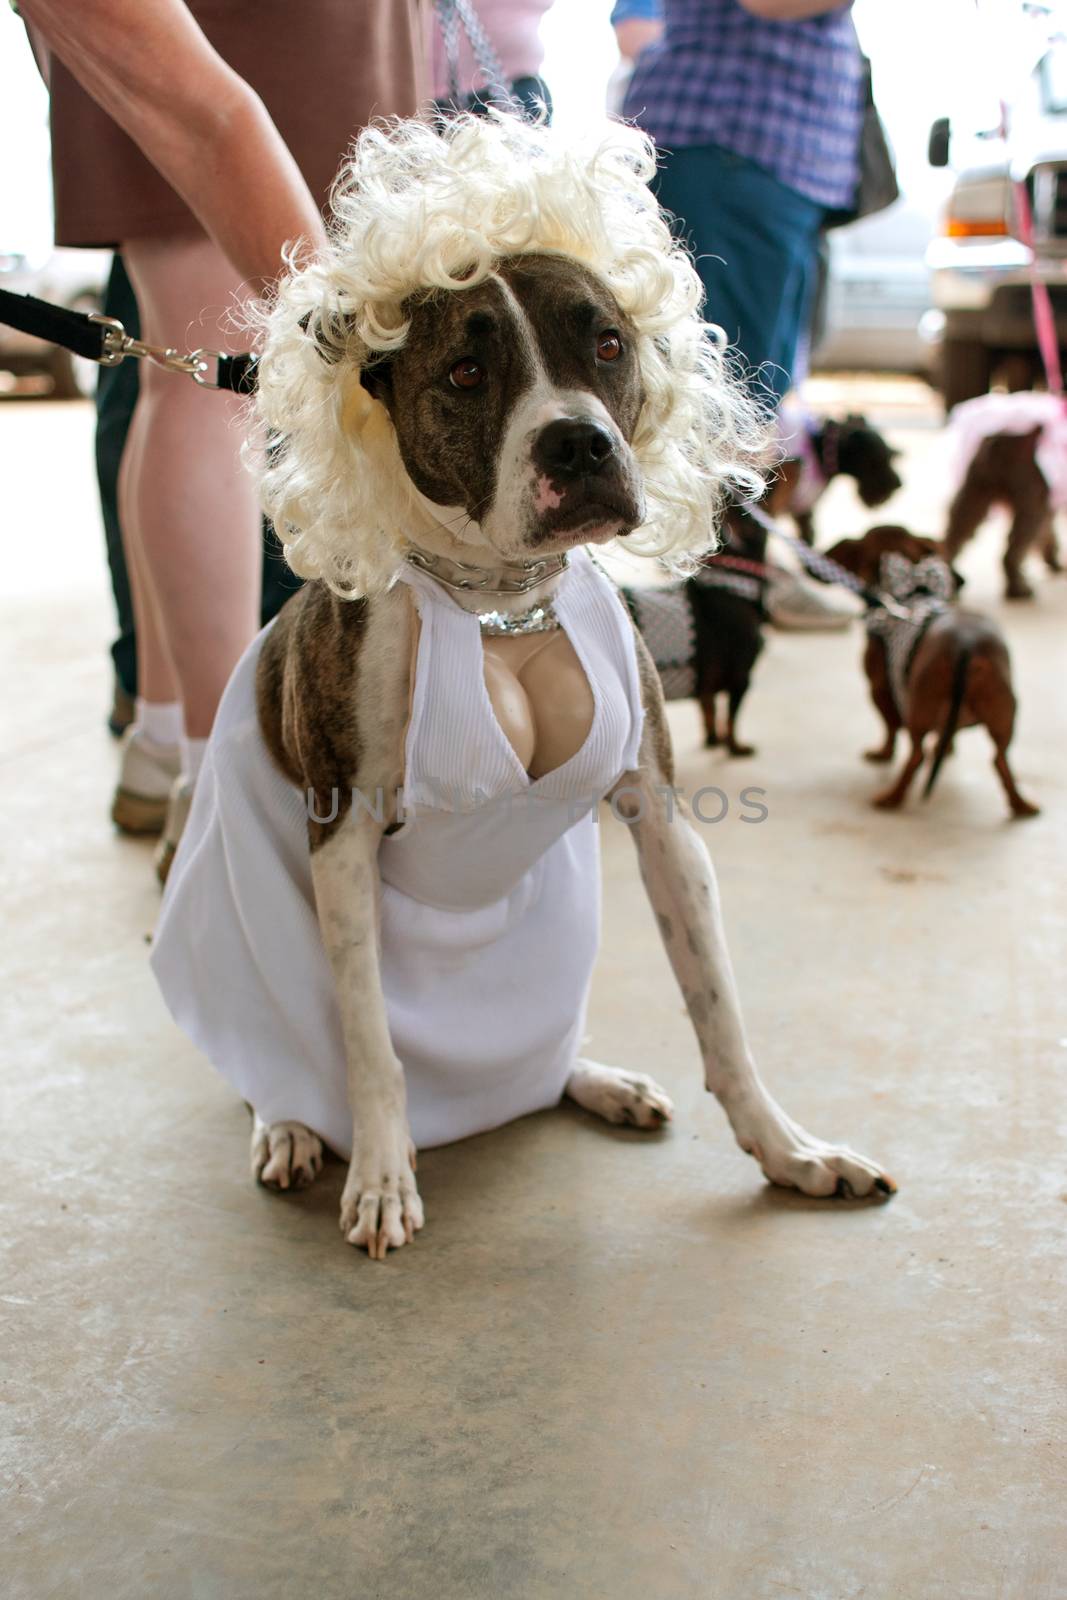 McDonough, GA, USA - May 10, 2014:  A dog is dressed in a Marilyn Monroe costume at the annual Dog Days of McDonough festival.  